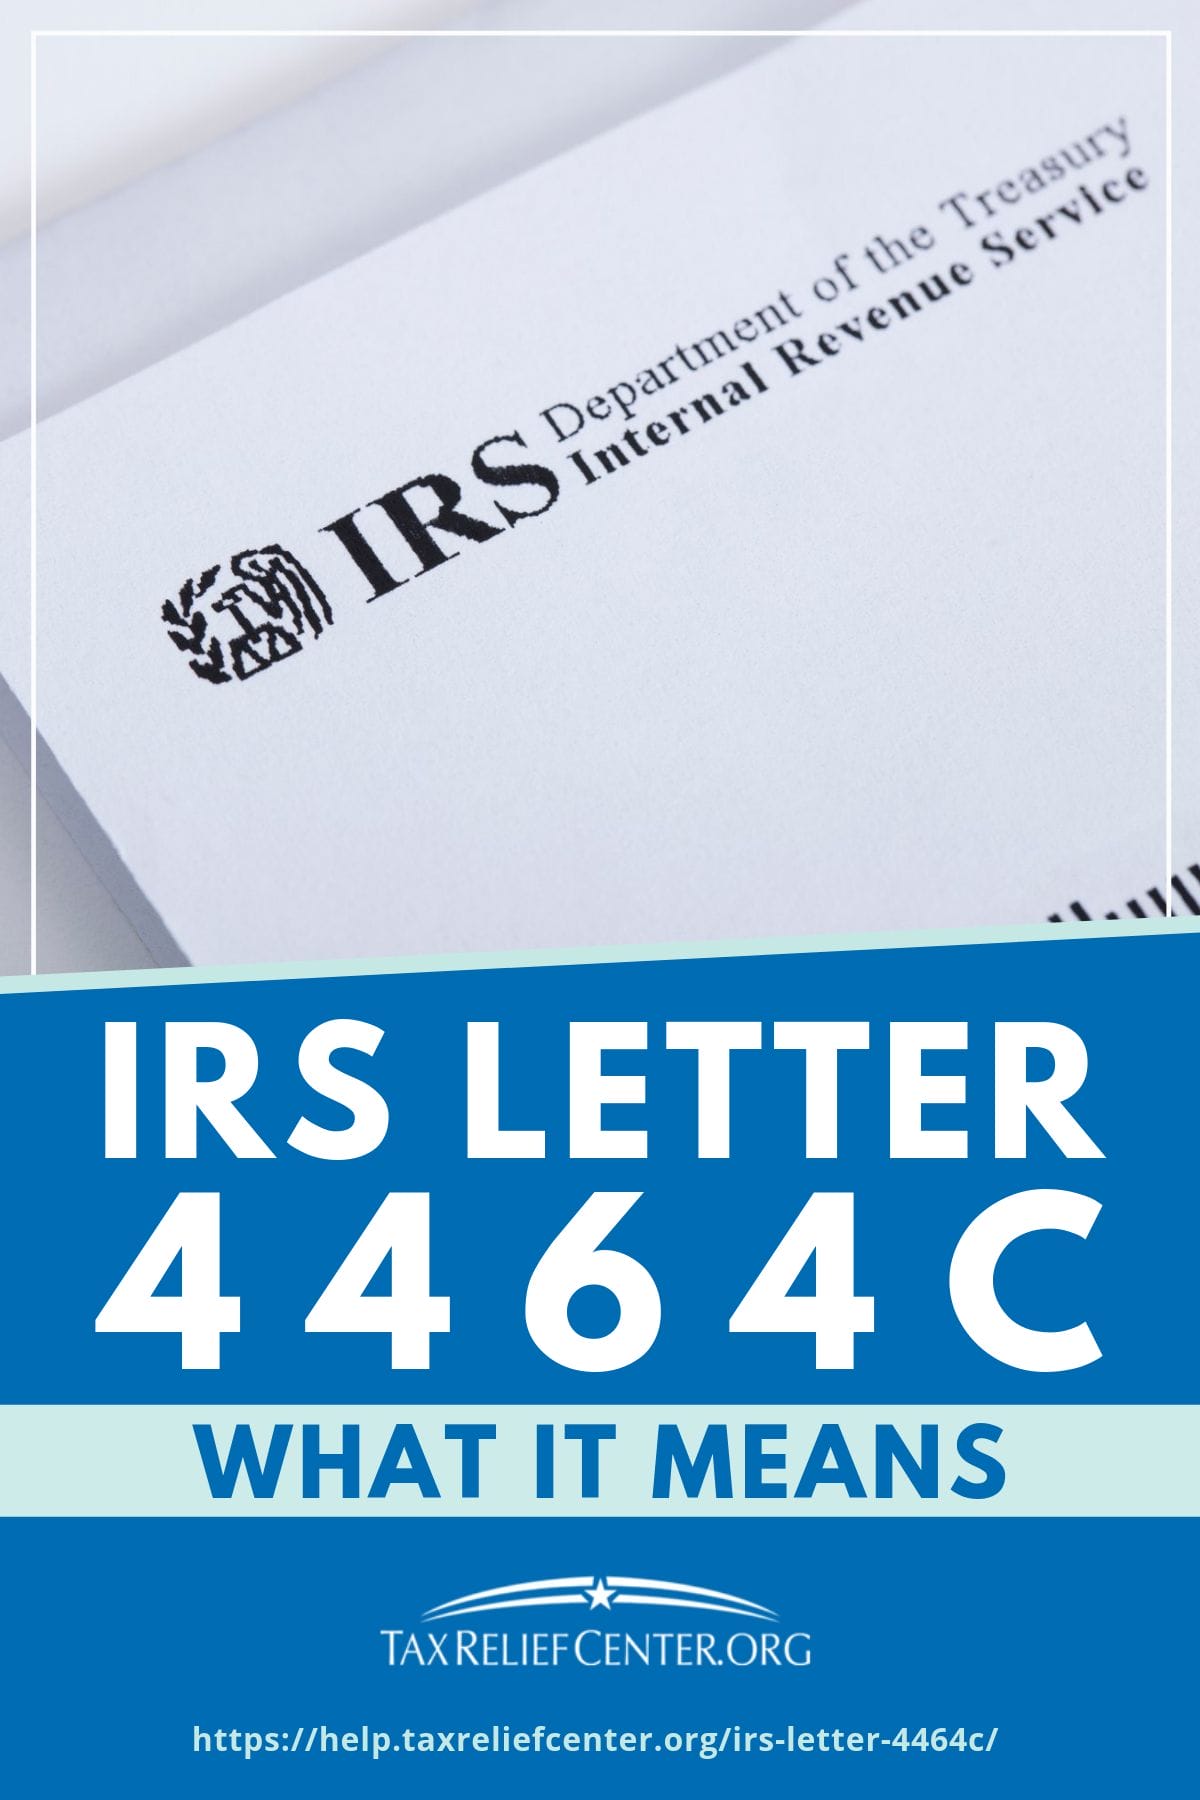 IRS Letter 4464C | What It Means https://help.taxreliefcenter.org/irs-letter-4464c/